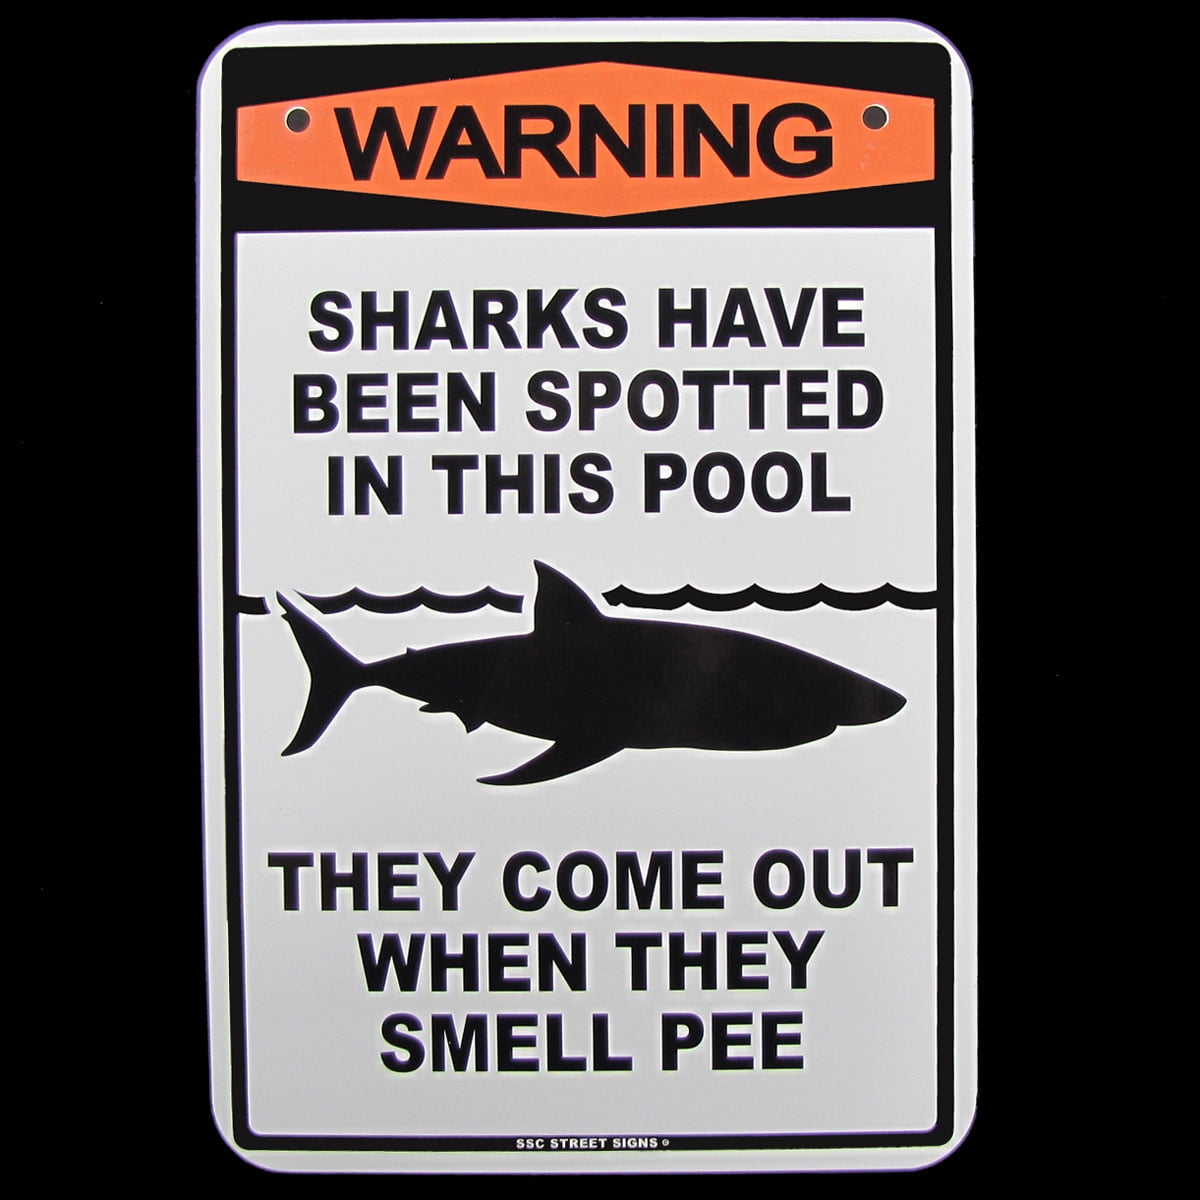 Pool Rules No Peeing Swimming Pool Shark Decor Poster Vintage Metal Tin Sign 12x8 In Asoodoo Funny Swimming Pool Sharks Danger Warning Sign Home Bathroom Decor Sharks Have Been Spotted in This Pool 